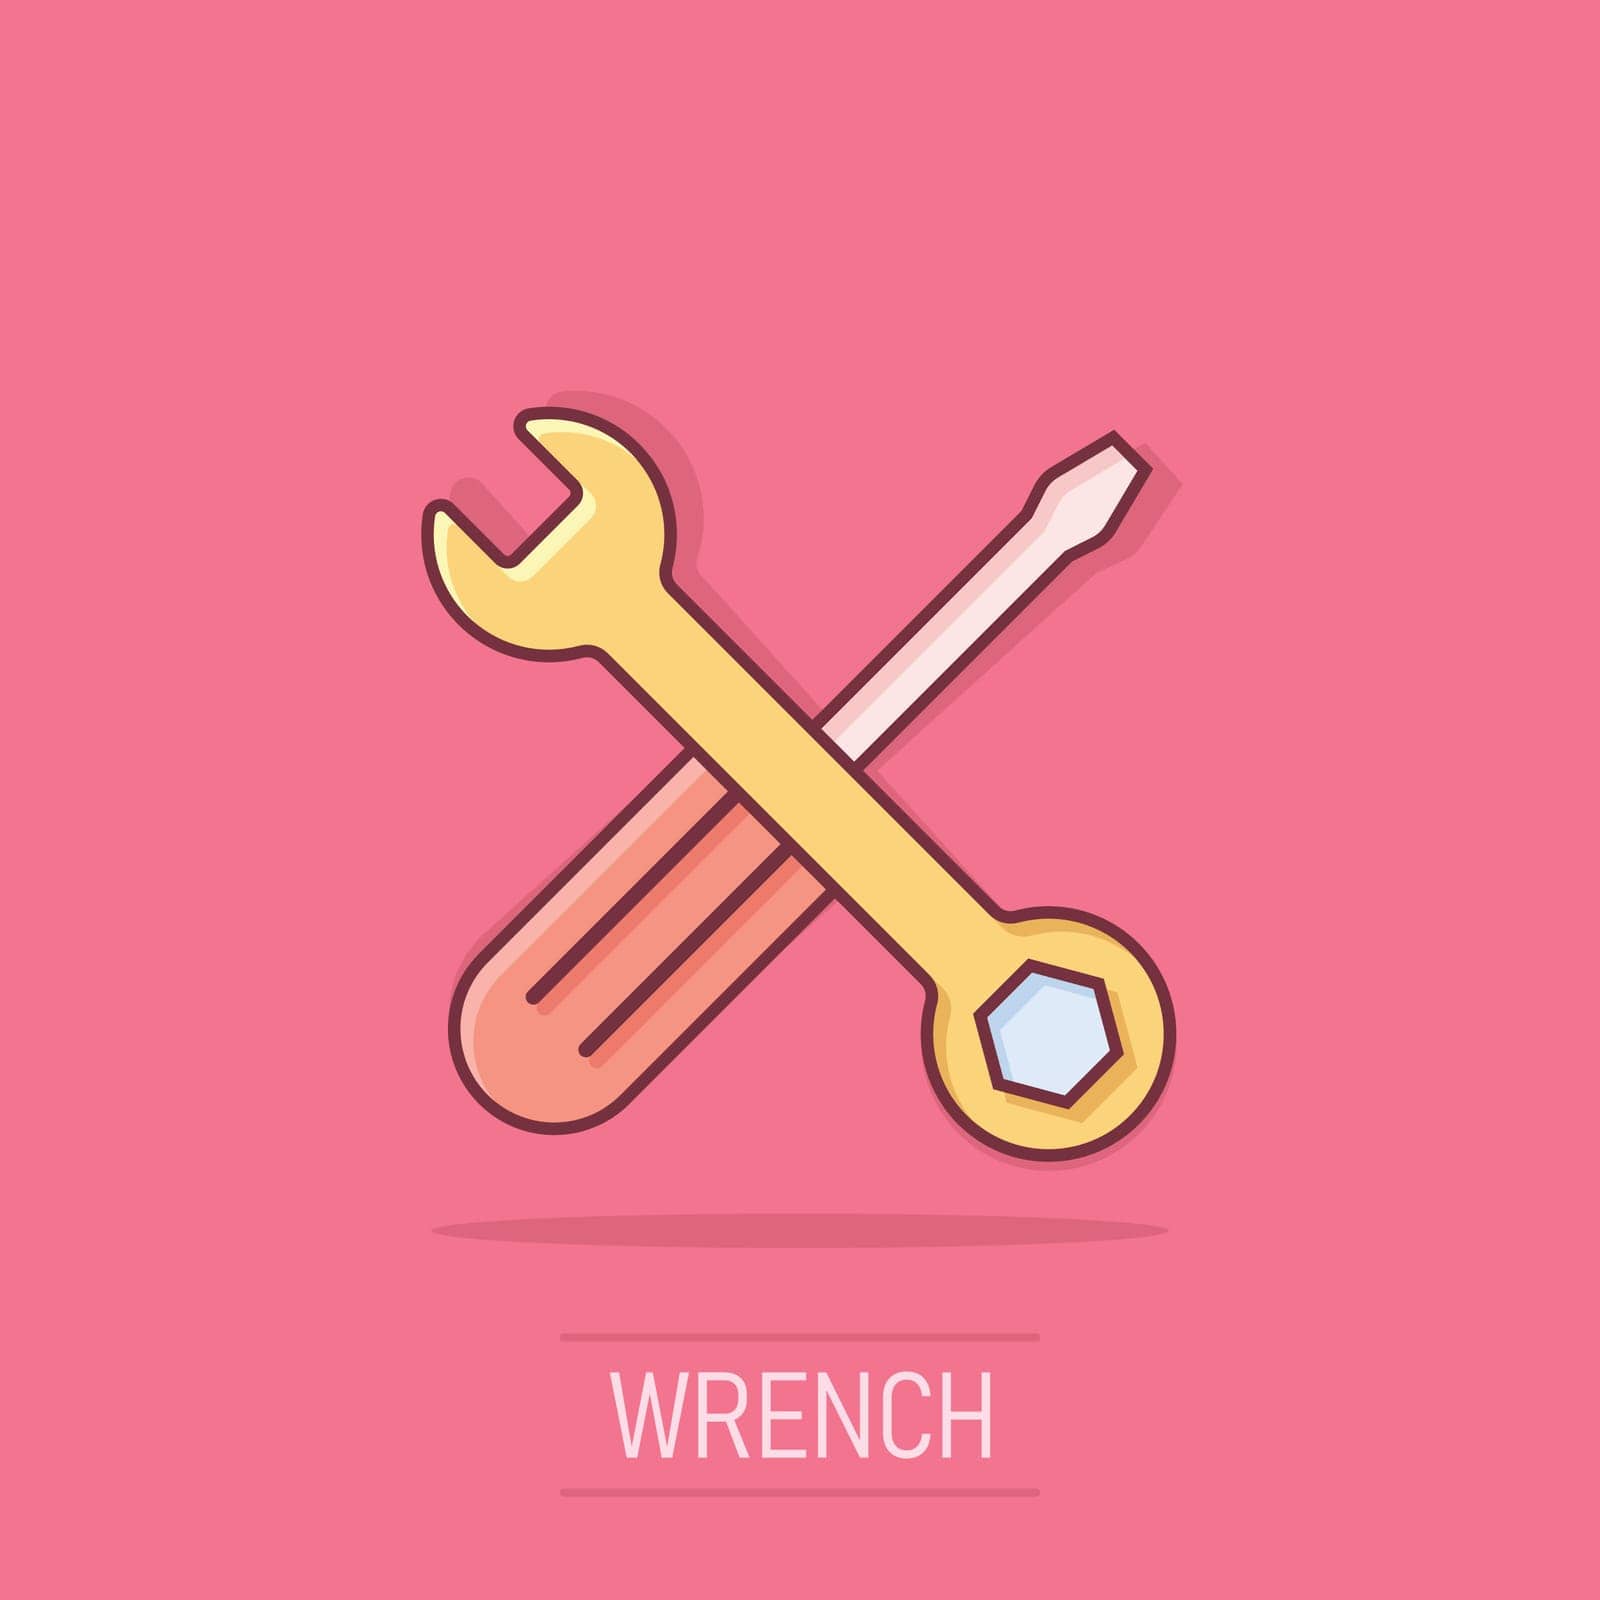 Wrench and screwdriver icon in comic style. Spanner key cartoon vector illustration on isolated background. Repair equipment splash effect business concept. by LysenkoA